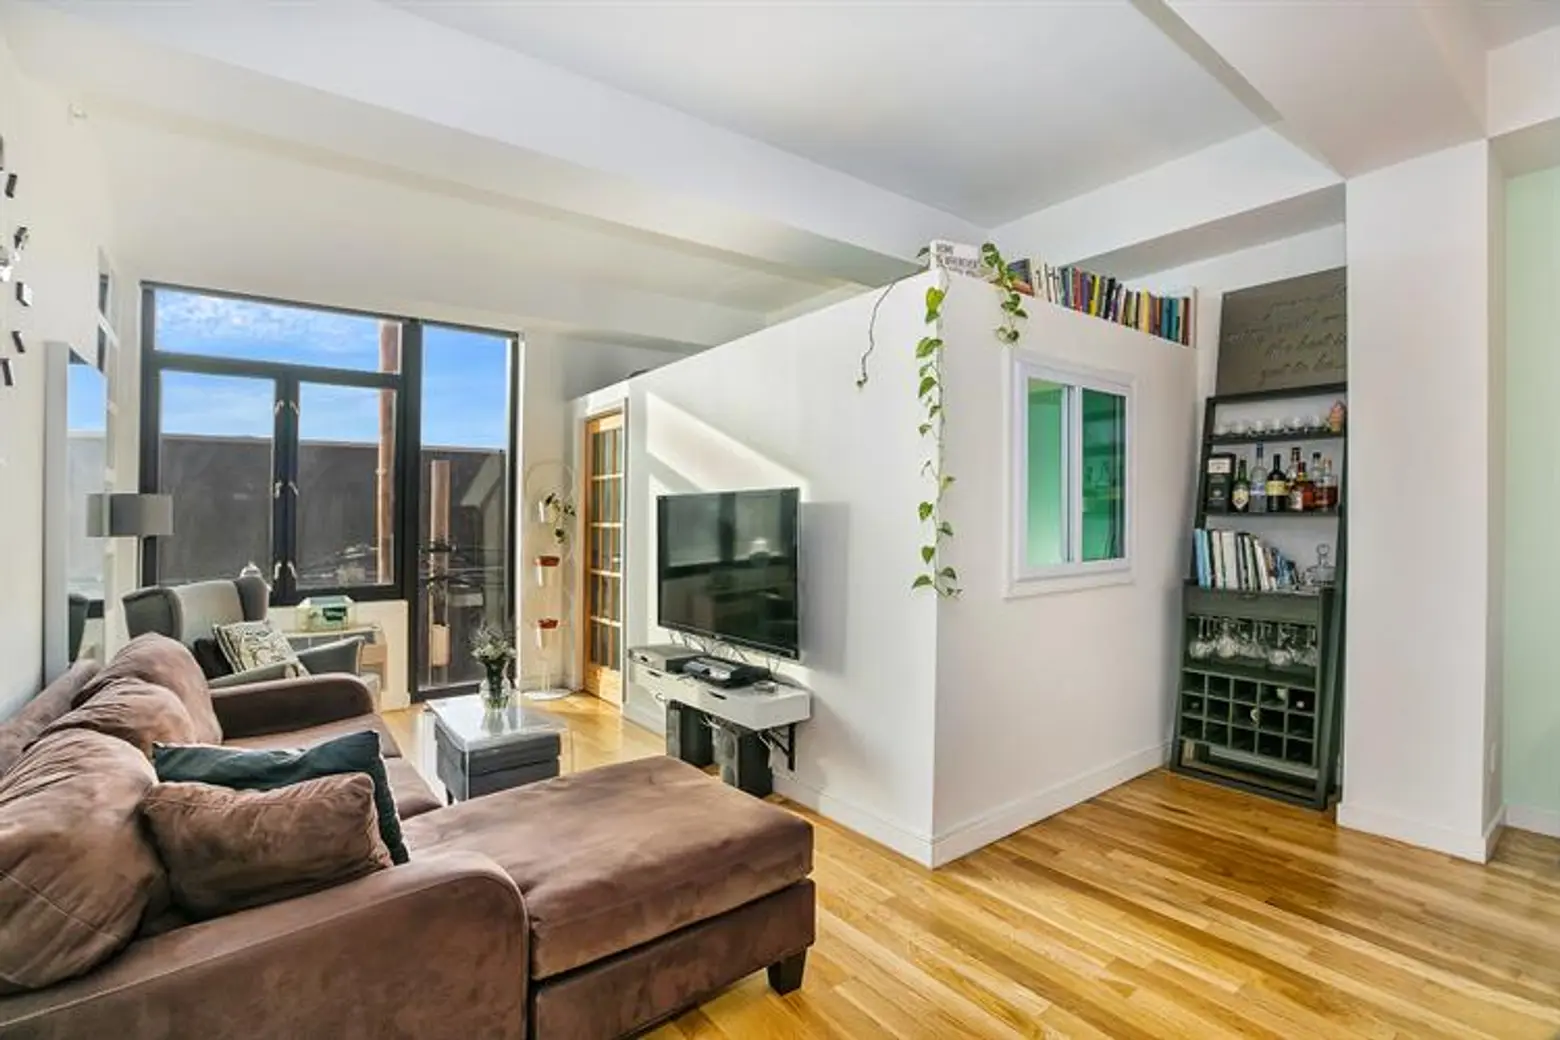 $3,400/Month Greenpoint Waterfront Mini-Loft Is Cozy and Cool With Killer Views